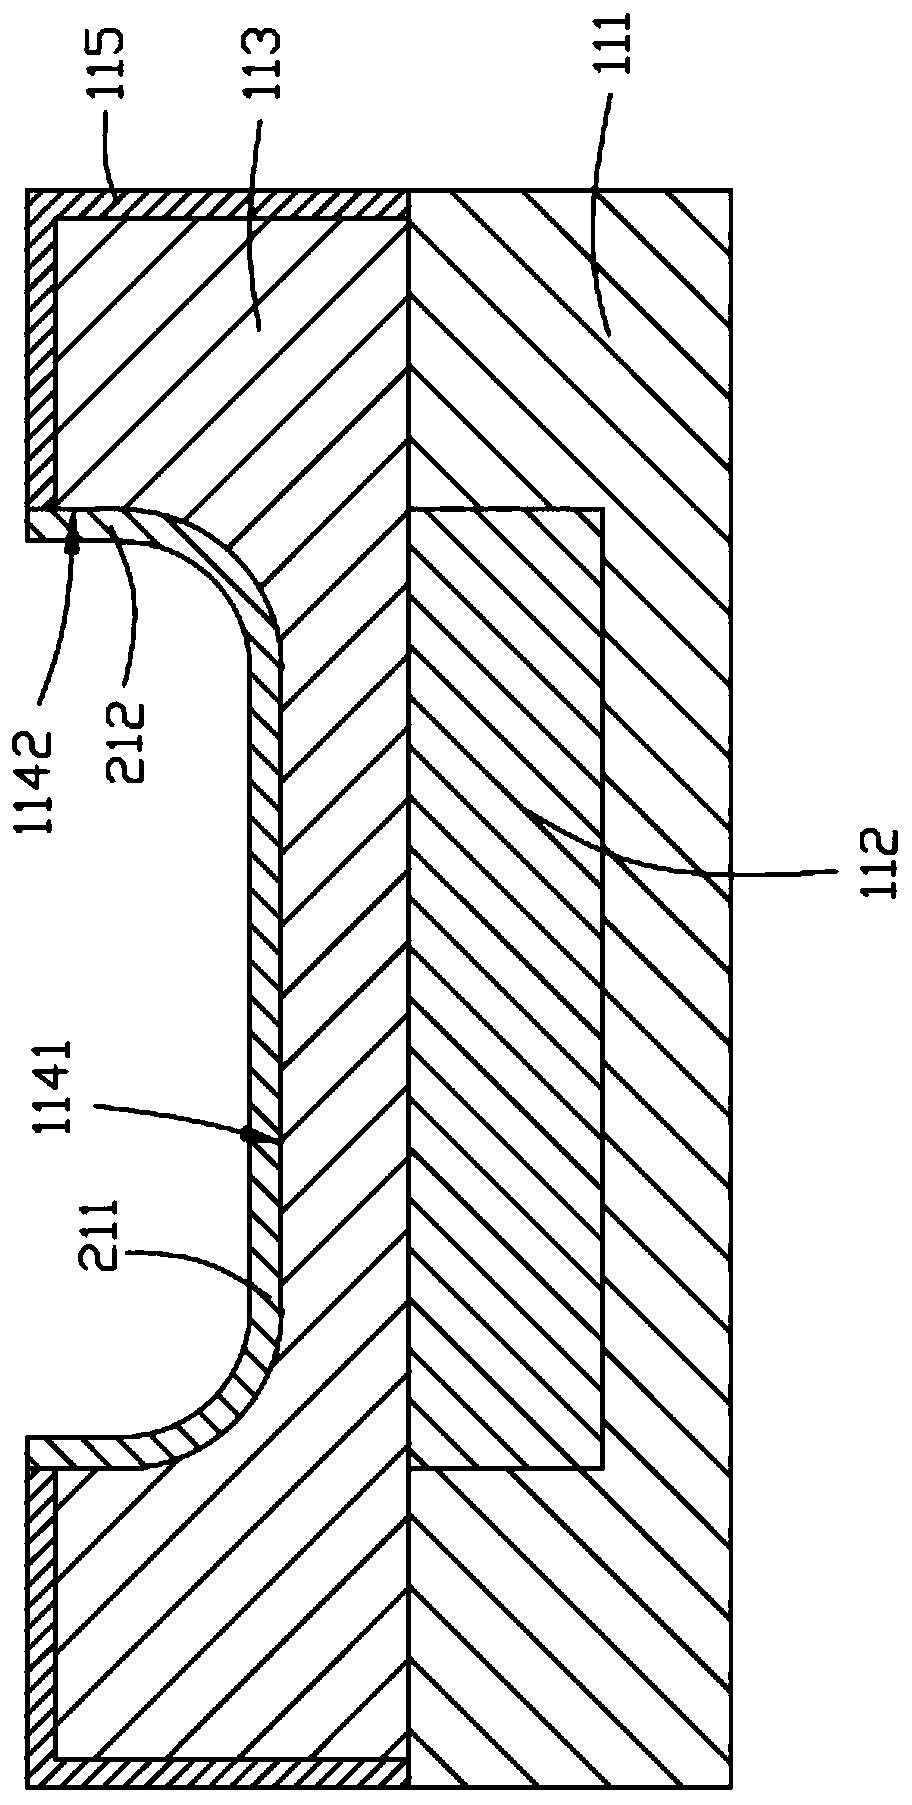 Attachment jig and attachment method using attachment jig